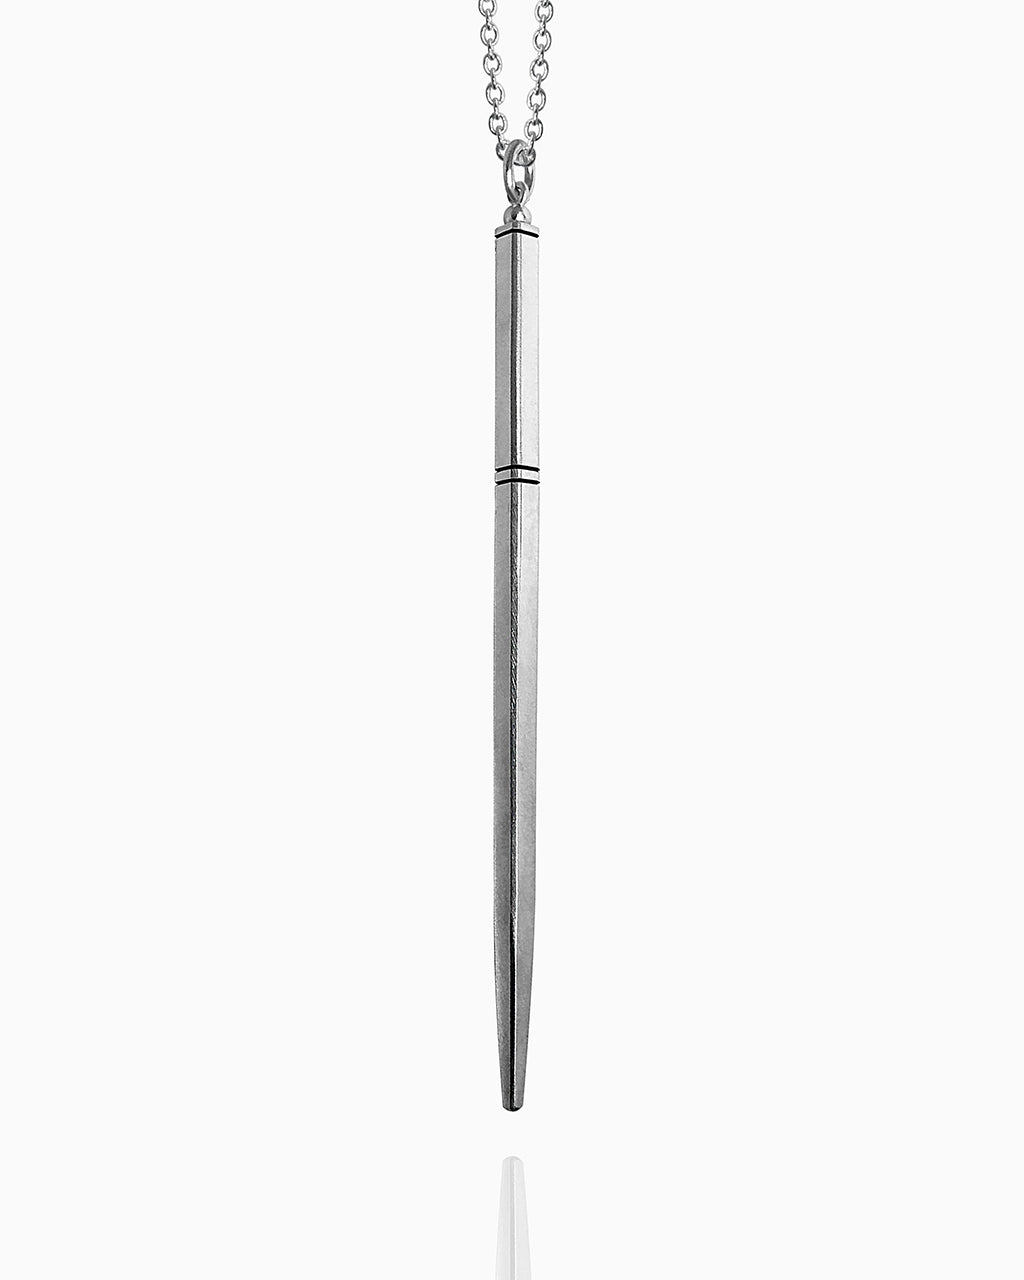 A sterling silver wand necklace hanging against a white background. This wand has a tapered square shape and is completely smooth except for three carved horizontal lines to delineate the wand handle.